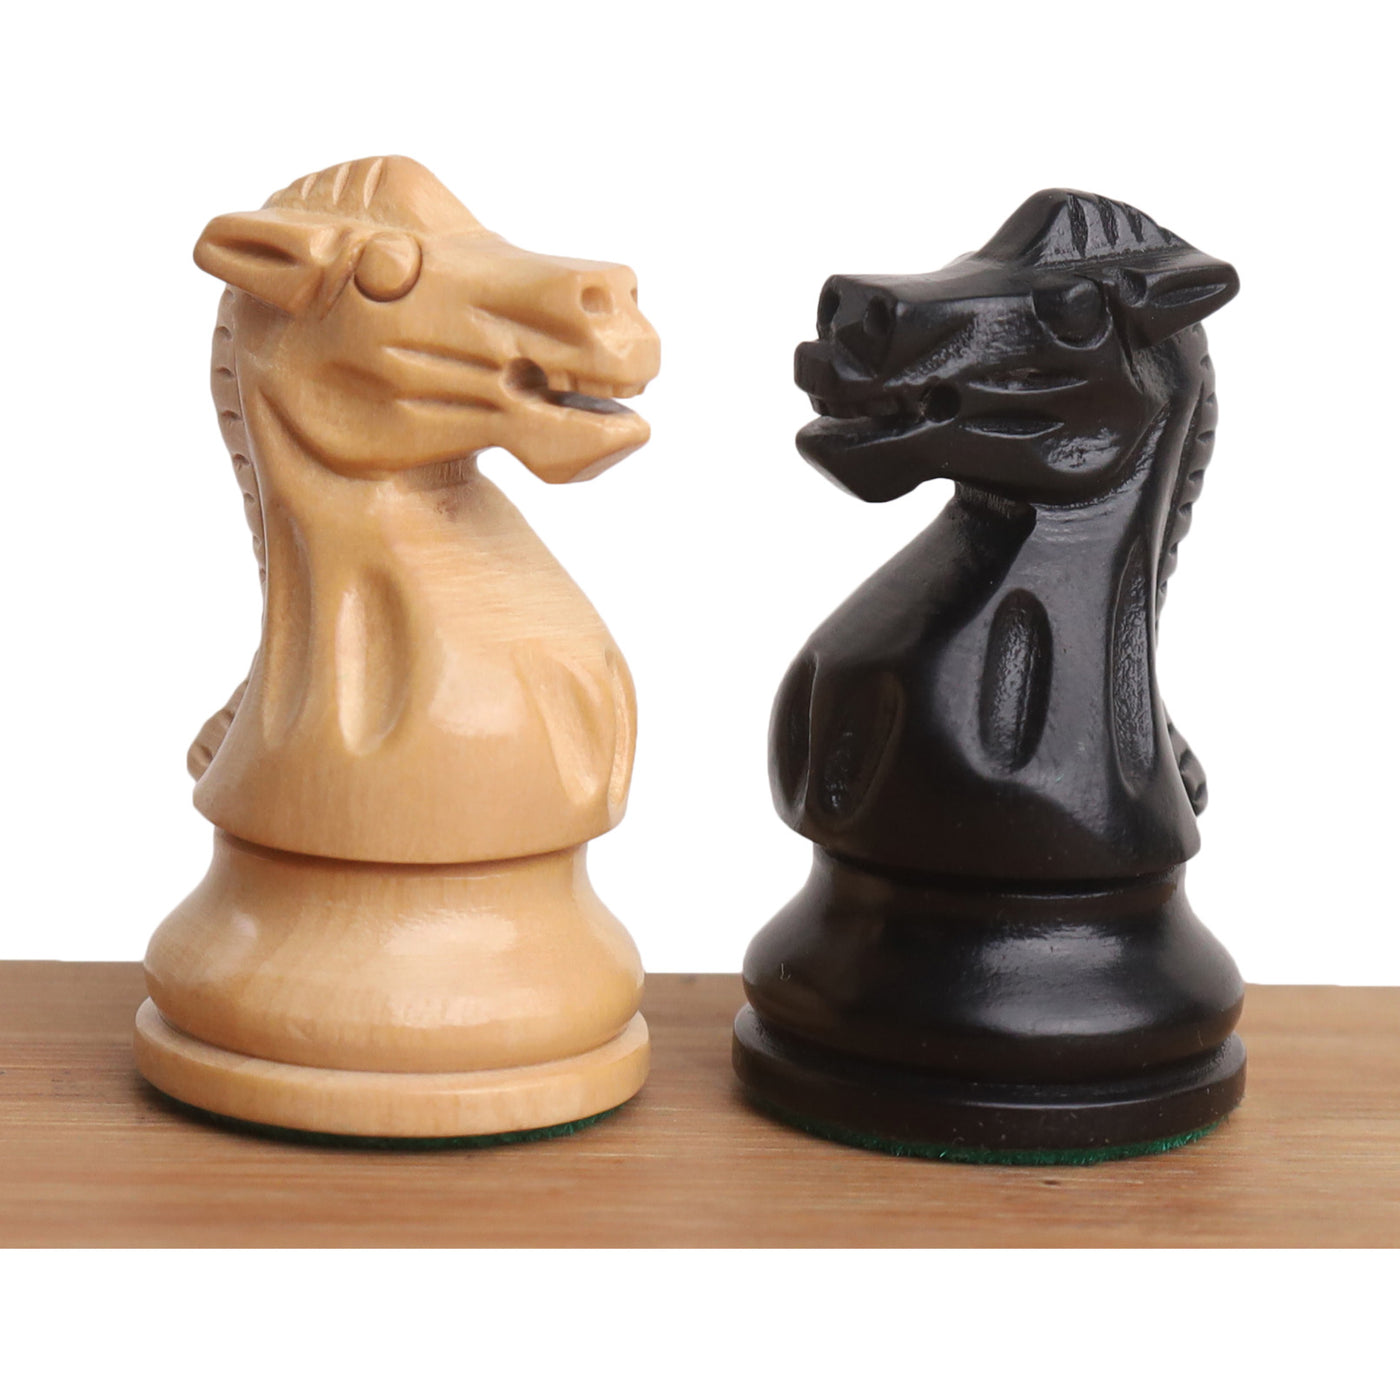 2.4" Pro Staunton Weighted Wooden Chess Pieces Only Set - Ebonised Boxwood